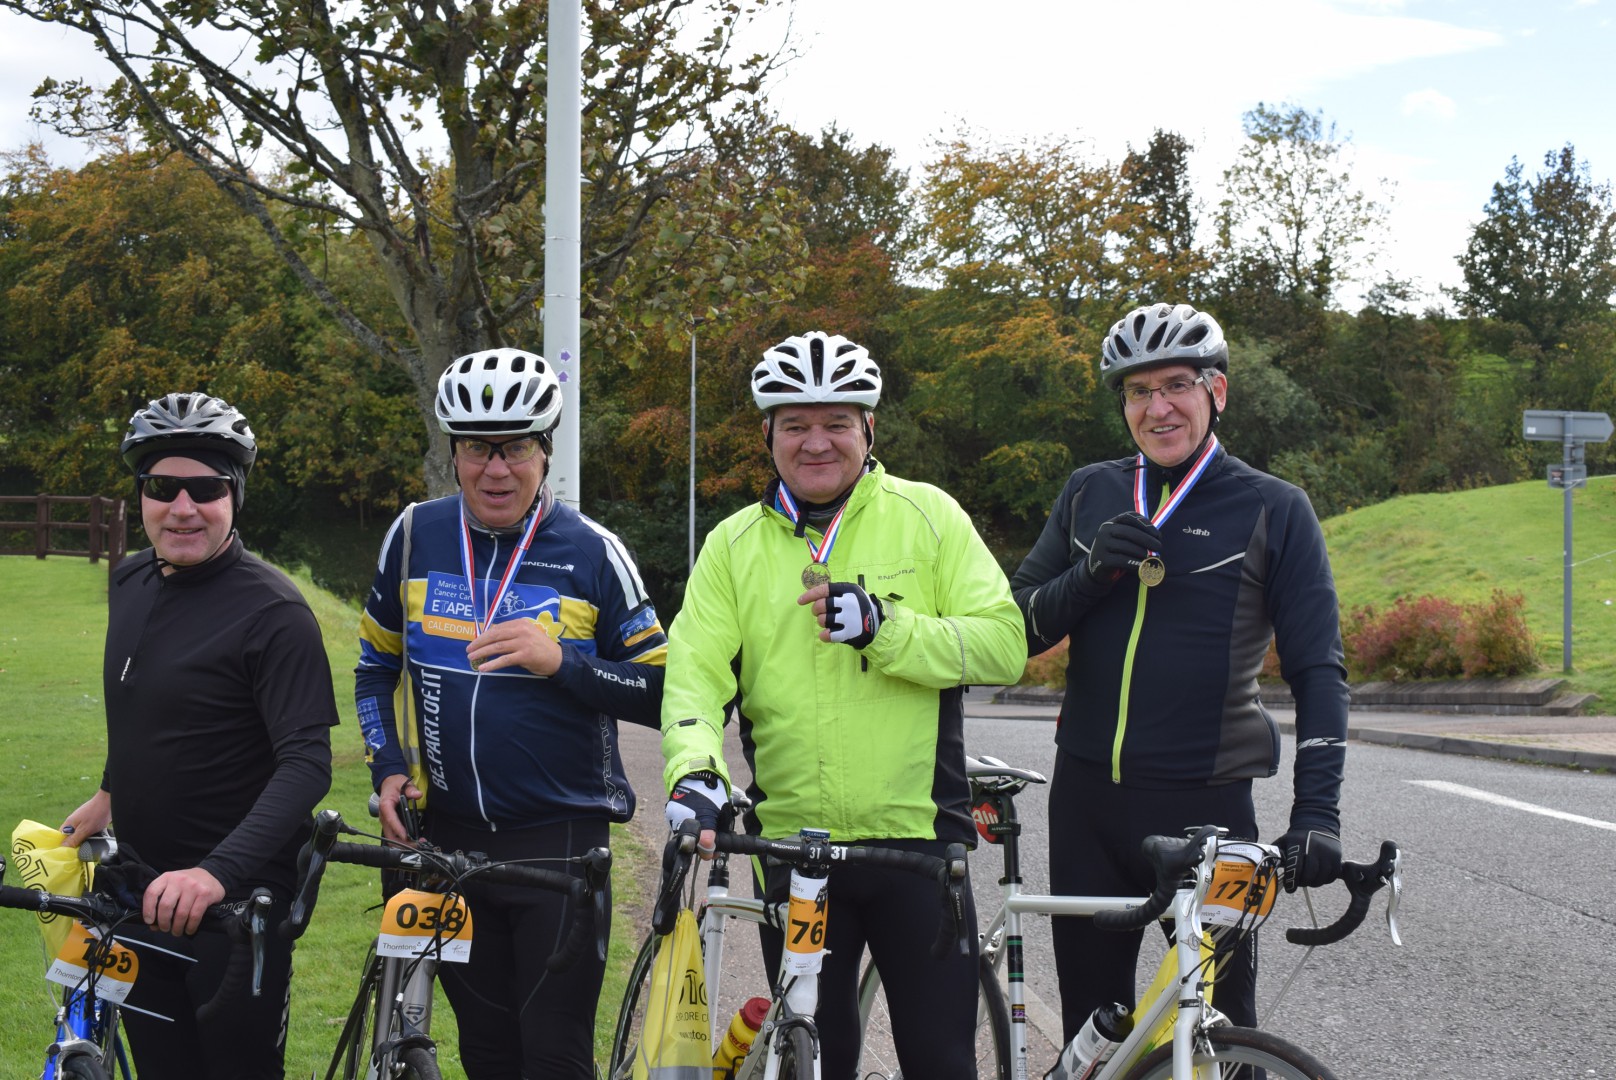 Cyclists show pedal power in 2018 Tour de Tay